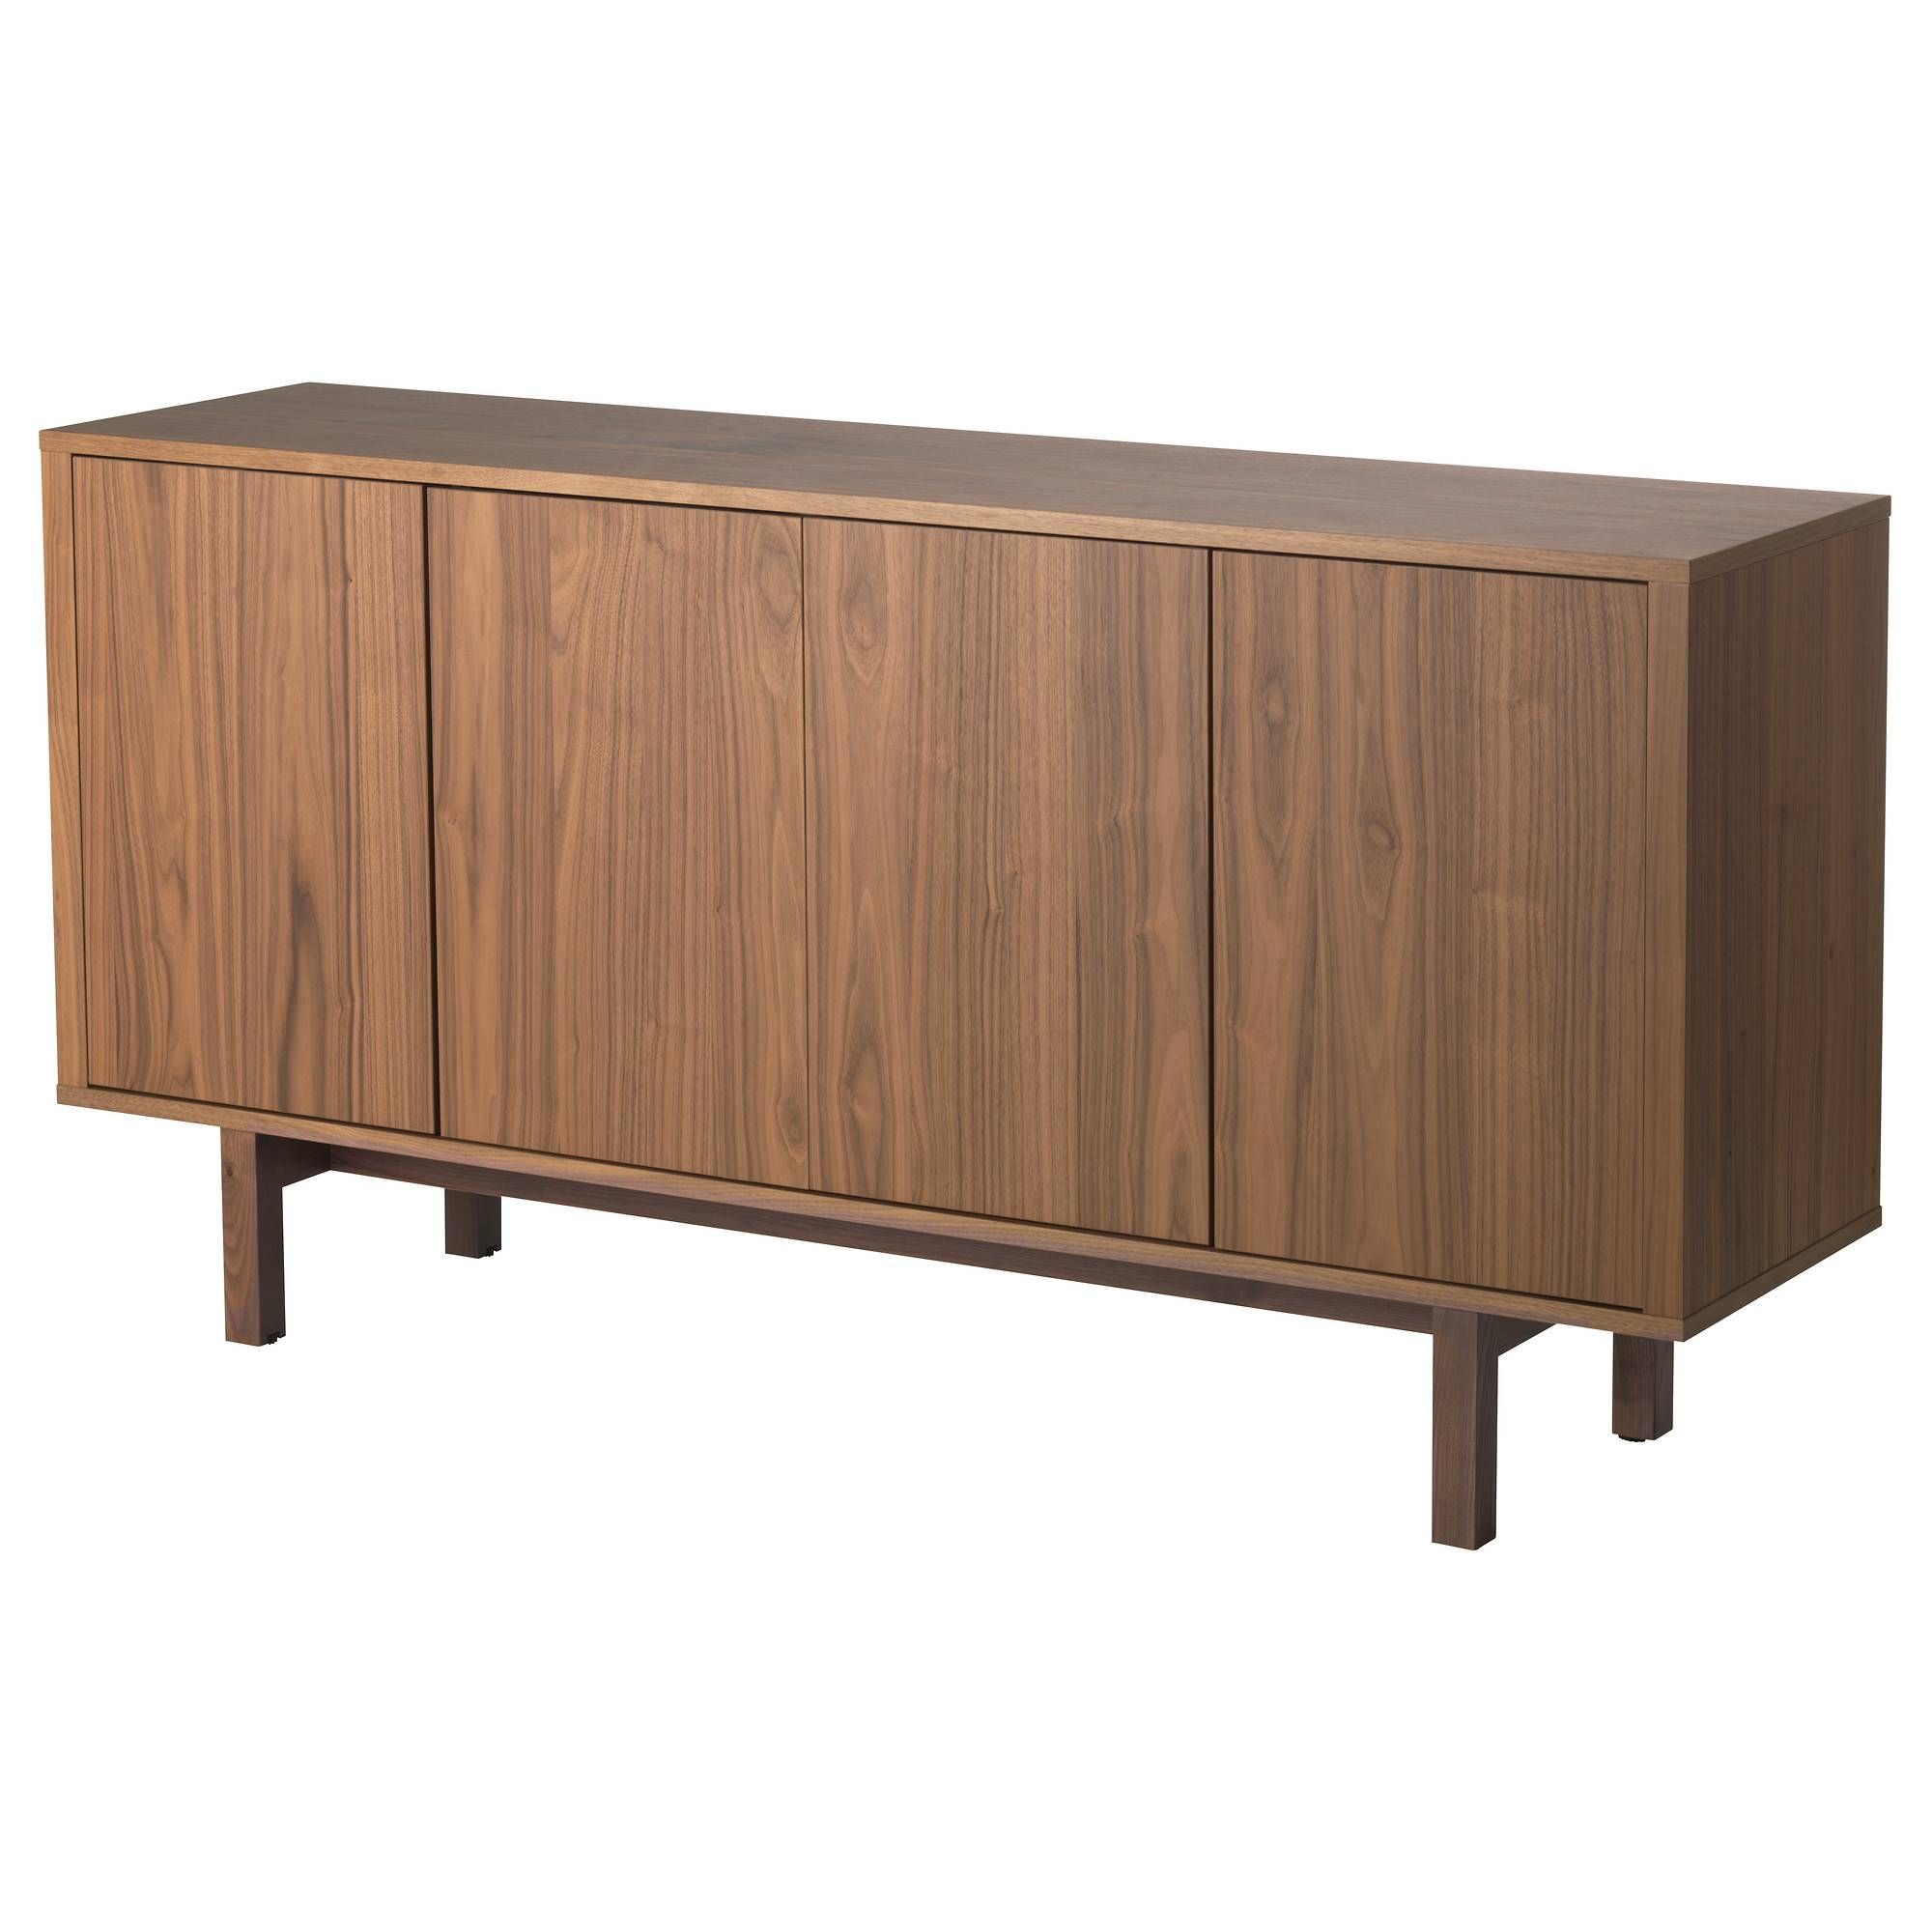 Stockholm Sideboard – Ikea With Regard To Stockholm Sideboards (View 2 of 15)